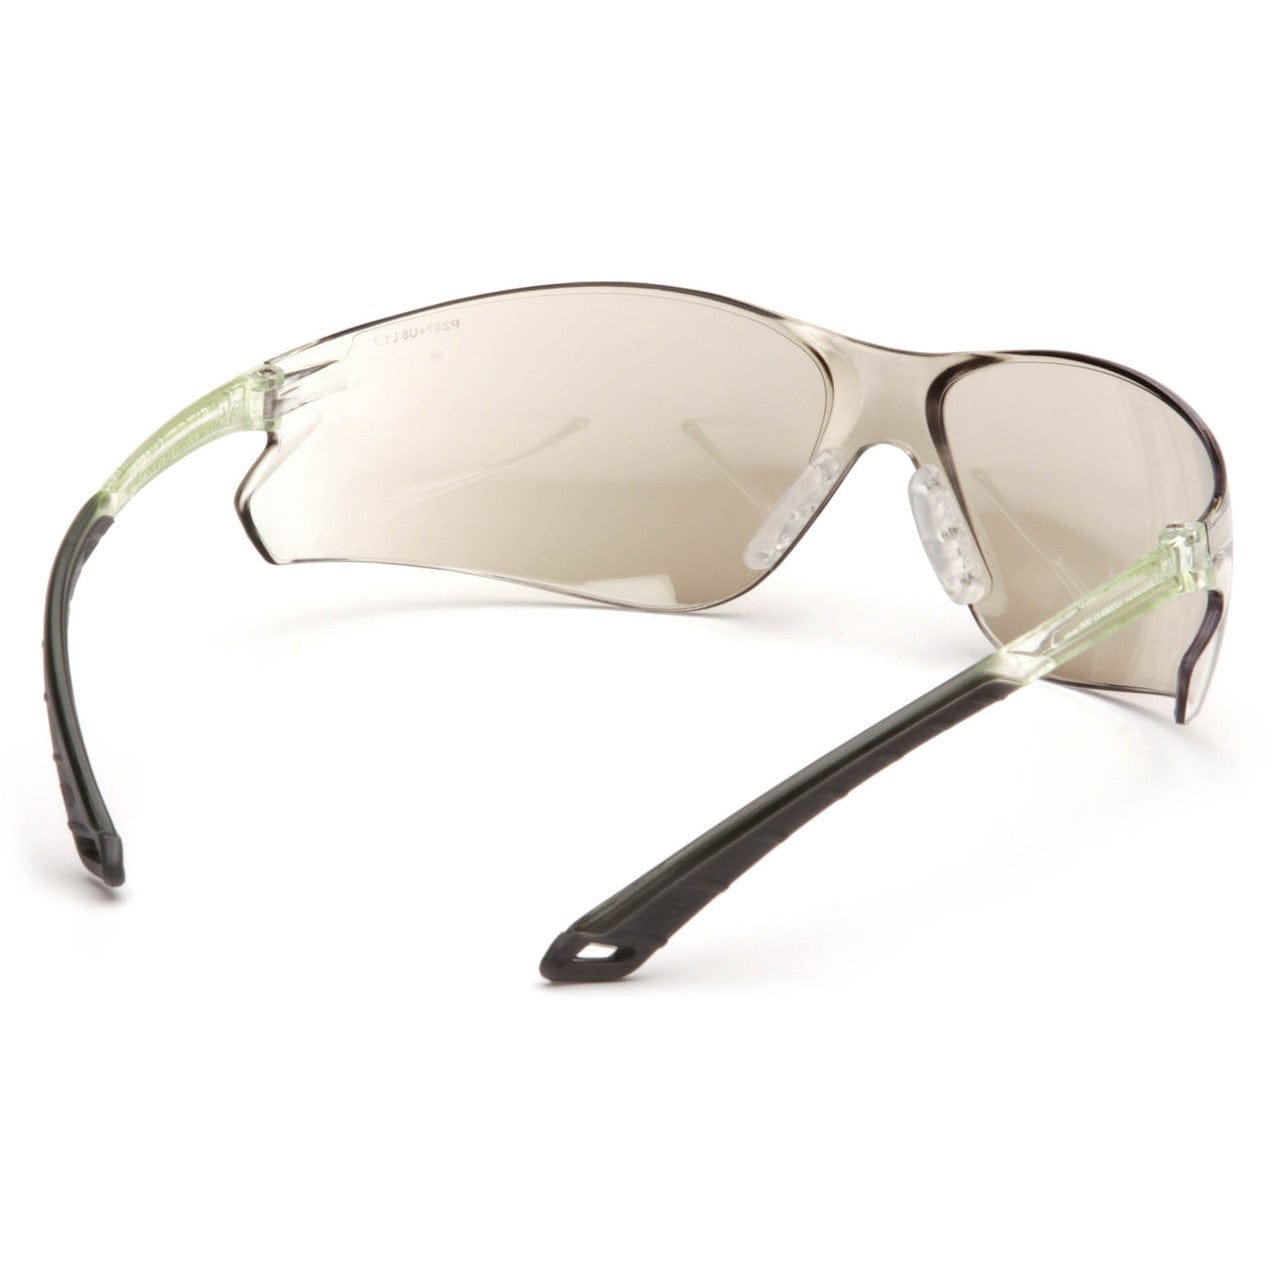 Pyramex Itek Safety Glasses with Indoor/Outdoor Lens S5880S Inside View